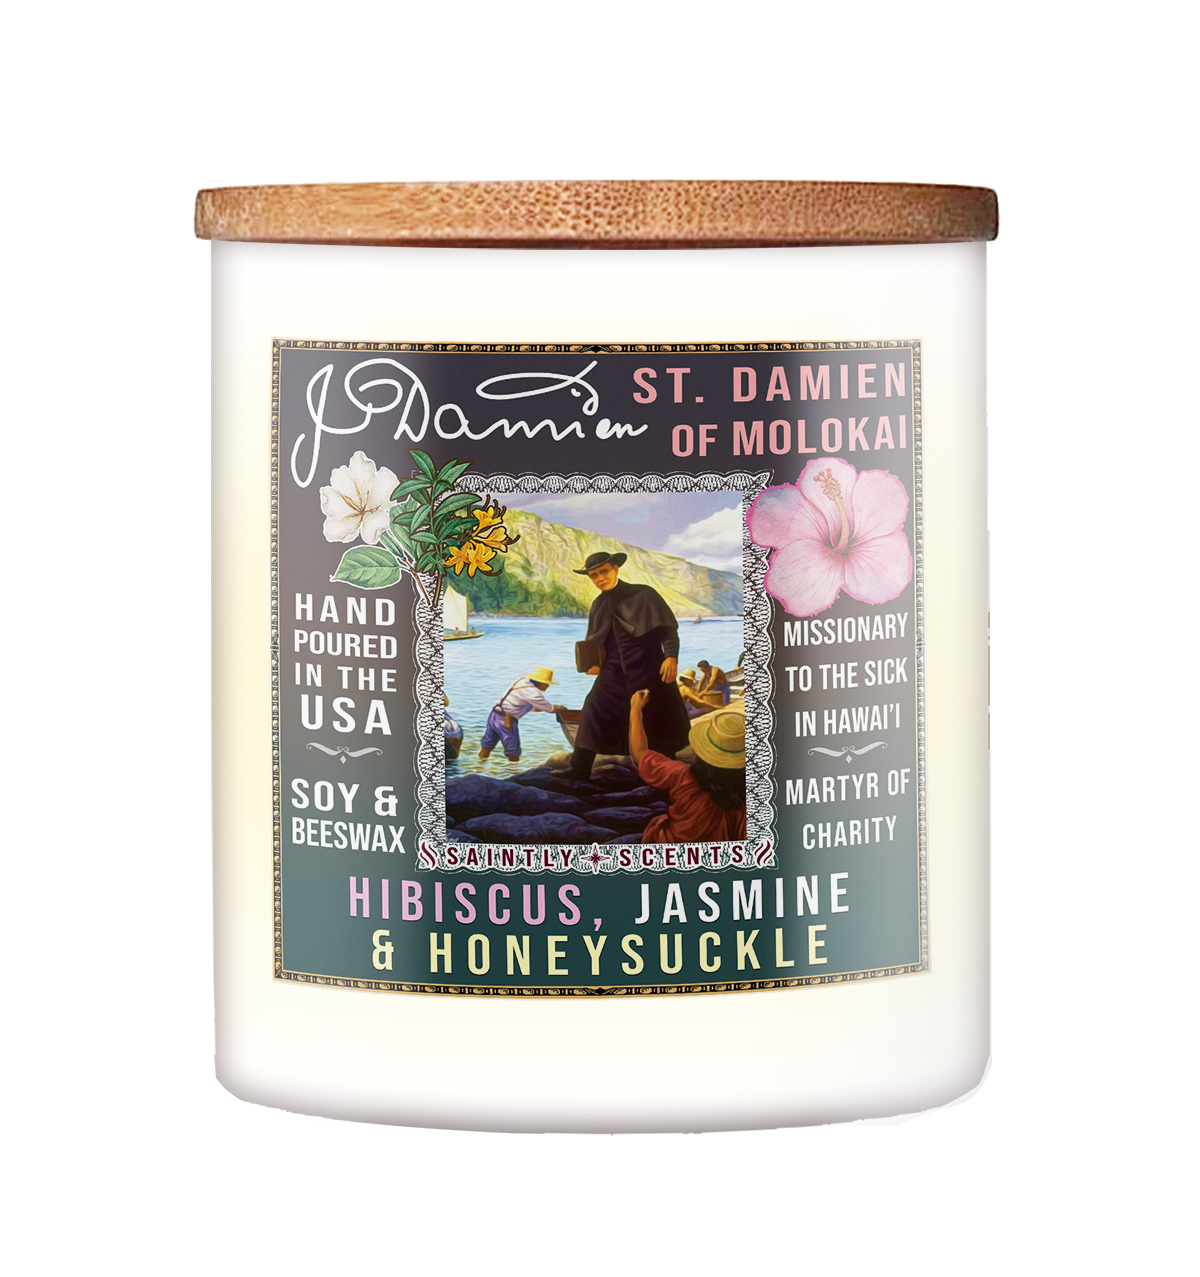 St. Damien of Molokai Honeysuckle and Hibiscus Scented Candle